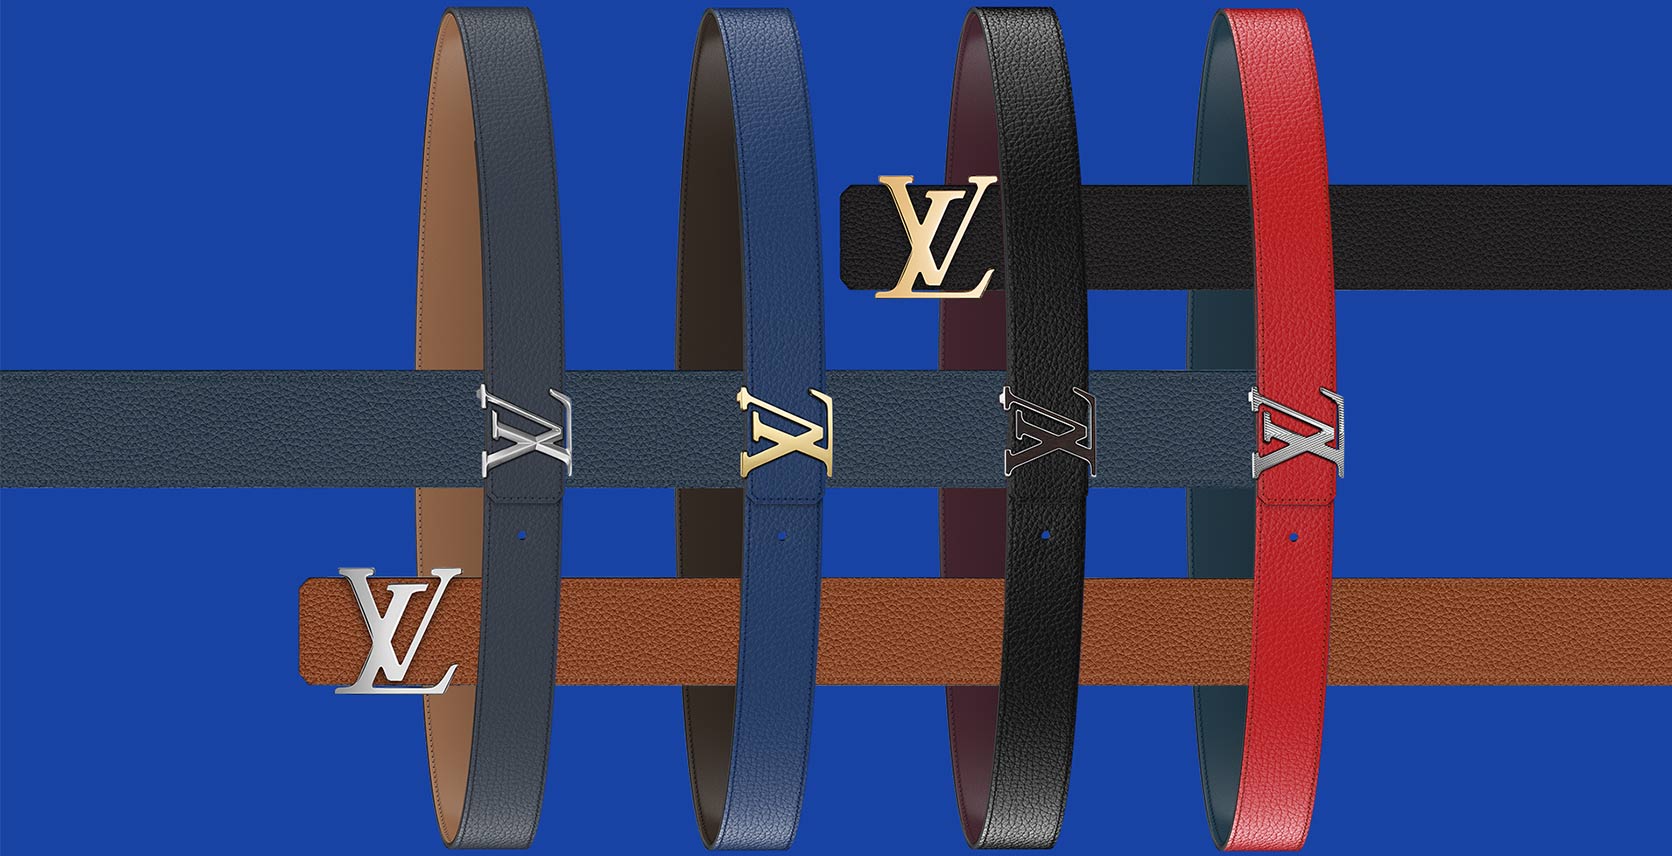 You Can Now Build Your Own Louis Vuitton Belt, and You Should